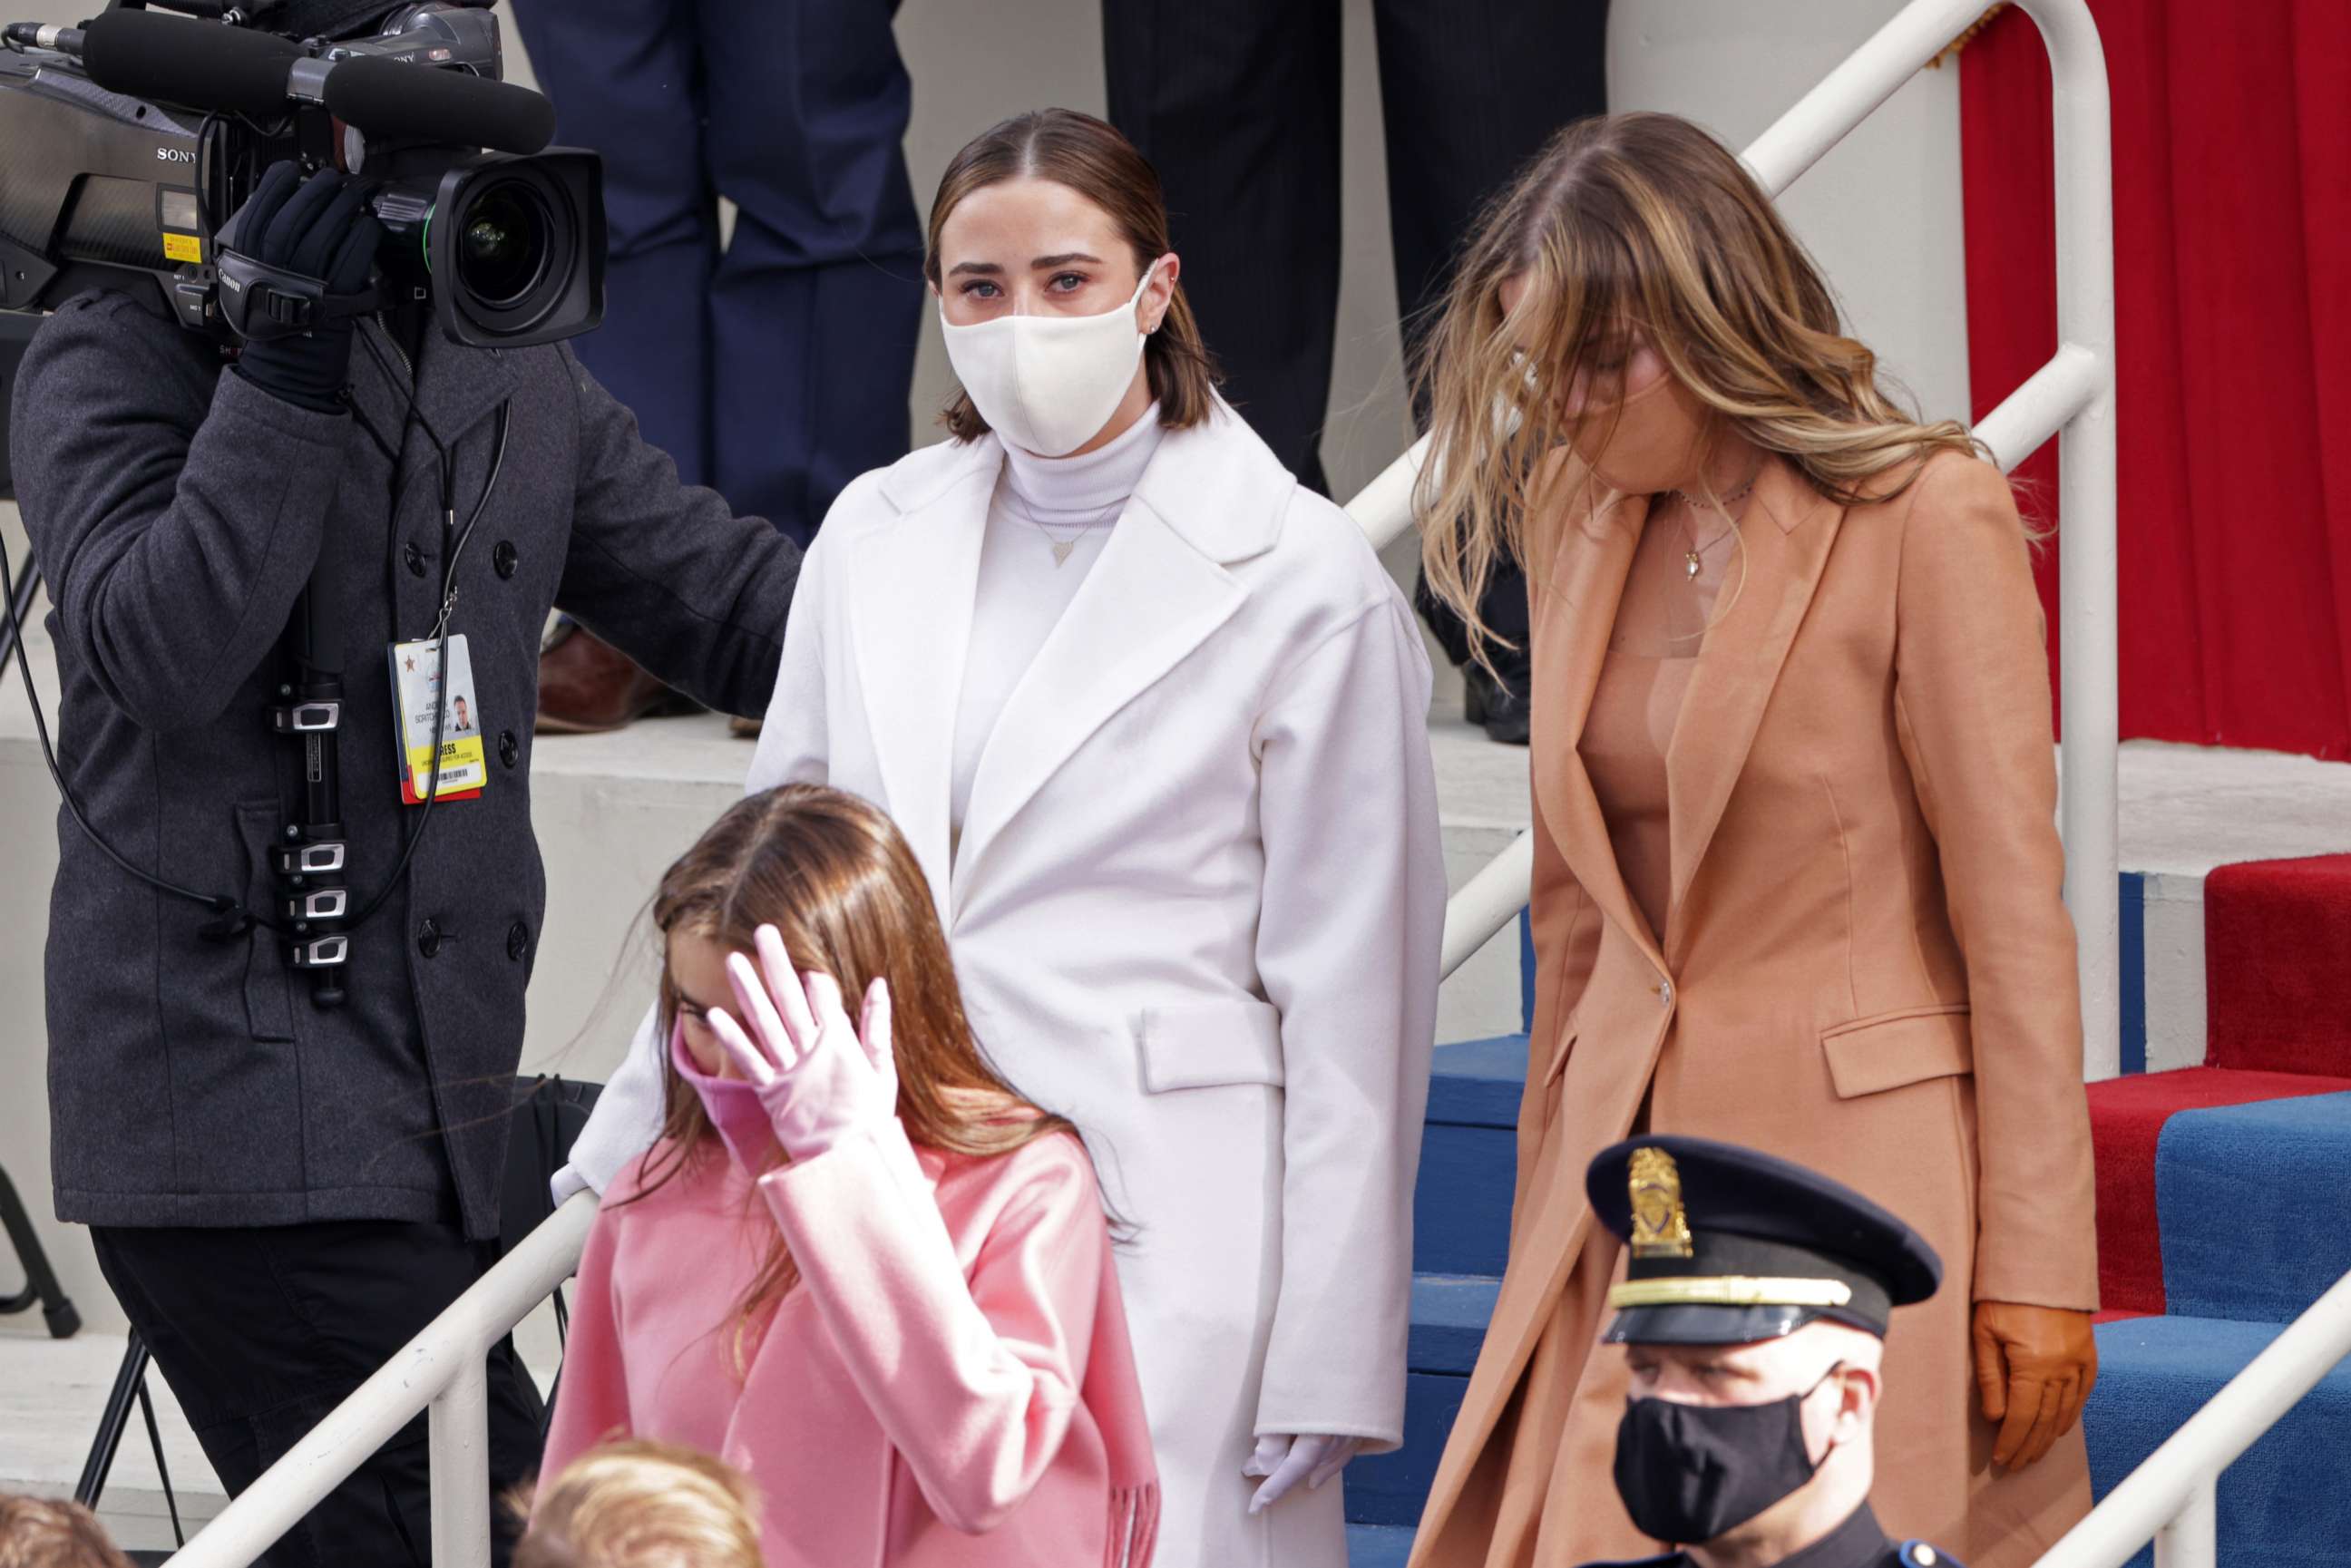 PHOTO: Naomi Biden and Natalie Biden, granddaughters of President Joe Biden, arrive to his inauguration on the West Front of the U.S. Capitol on Jan. 20, 2021, in Washington, D.C.